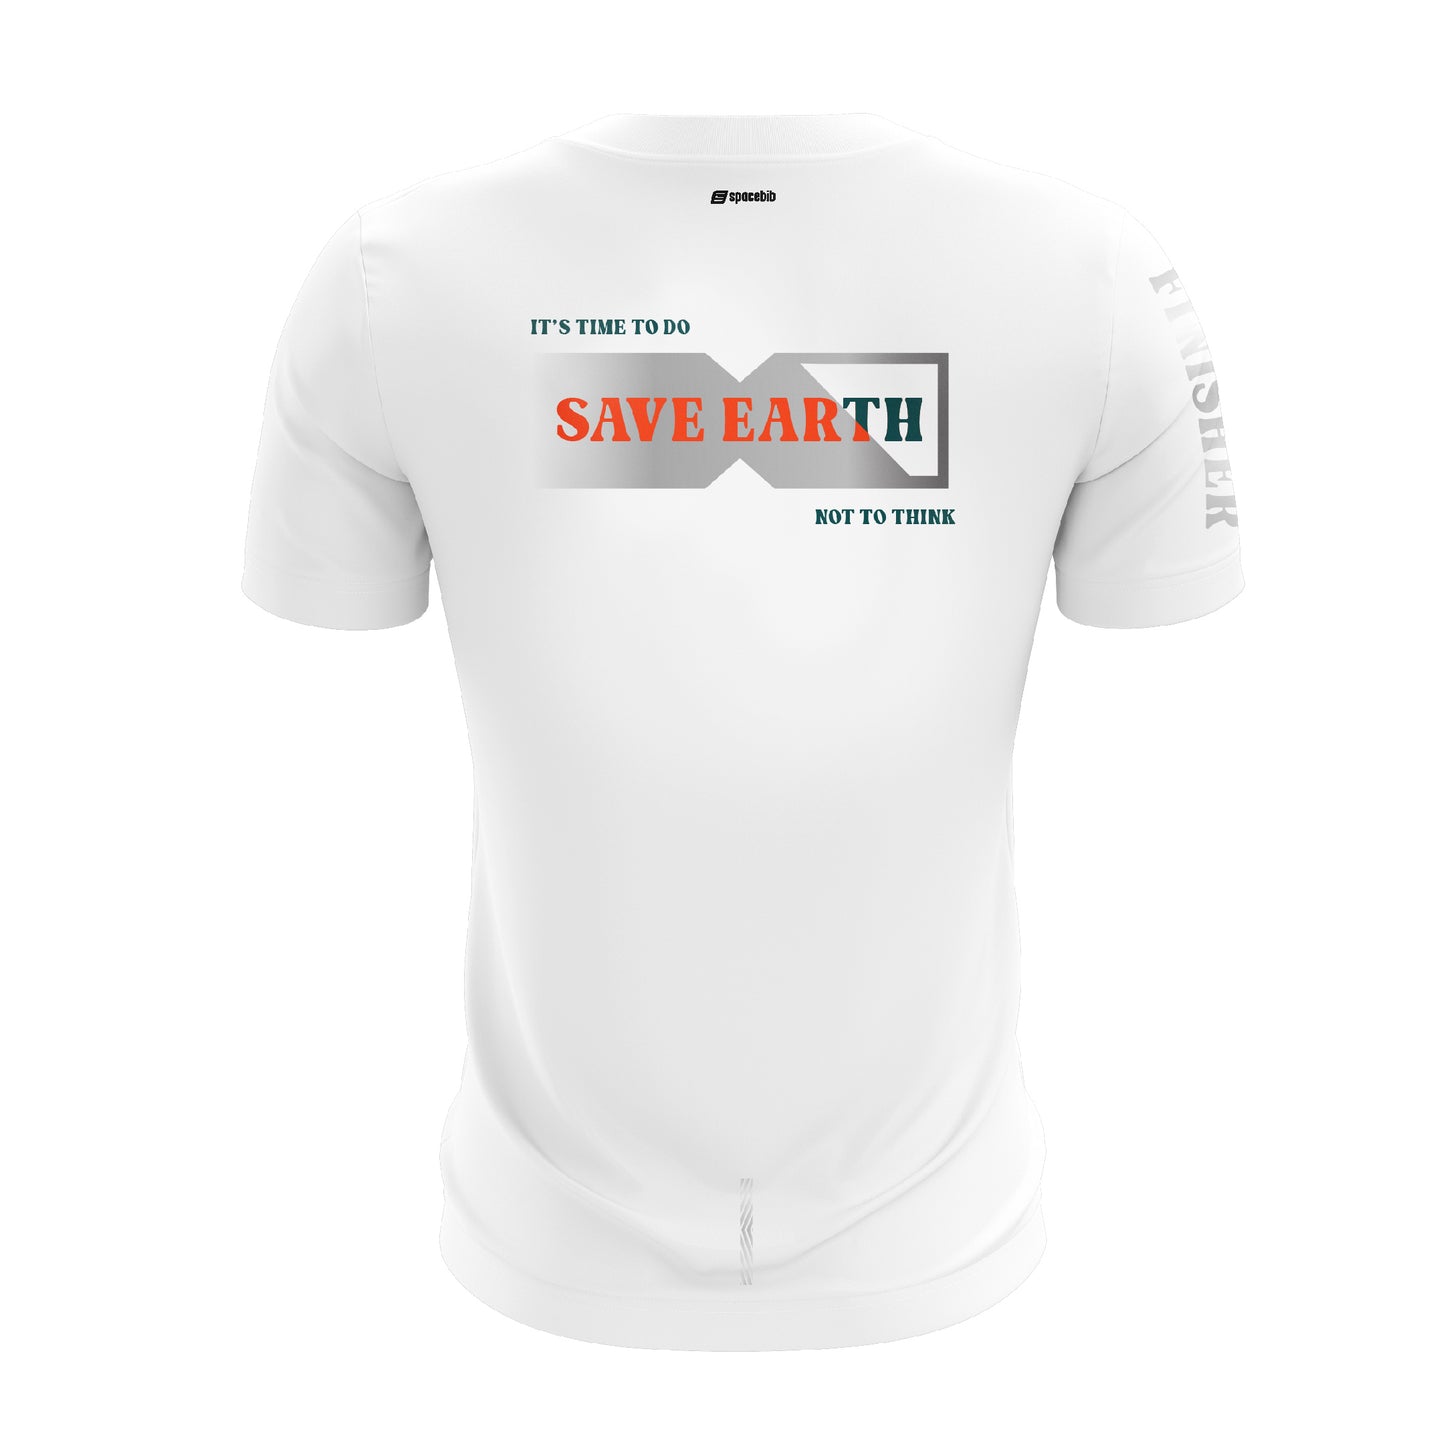 Earth Day Online Race 2021 Finisher T-Shirt